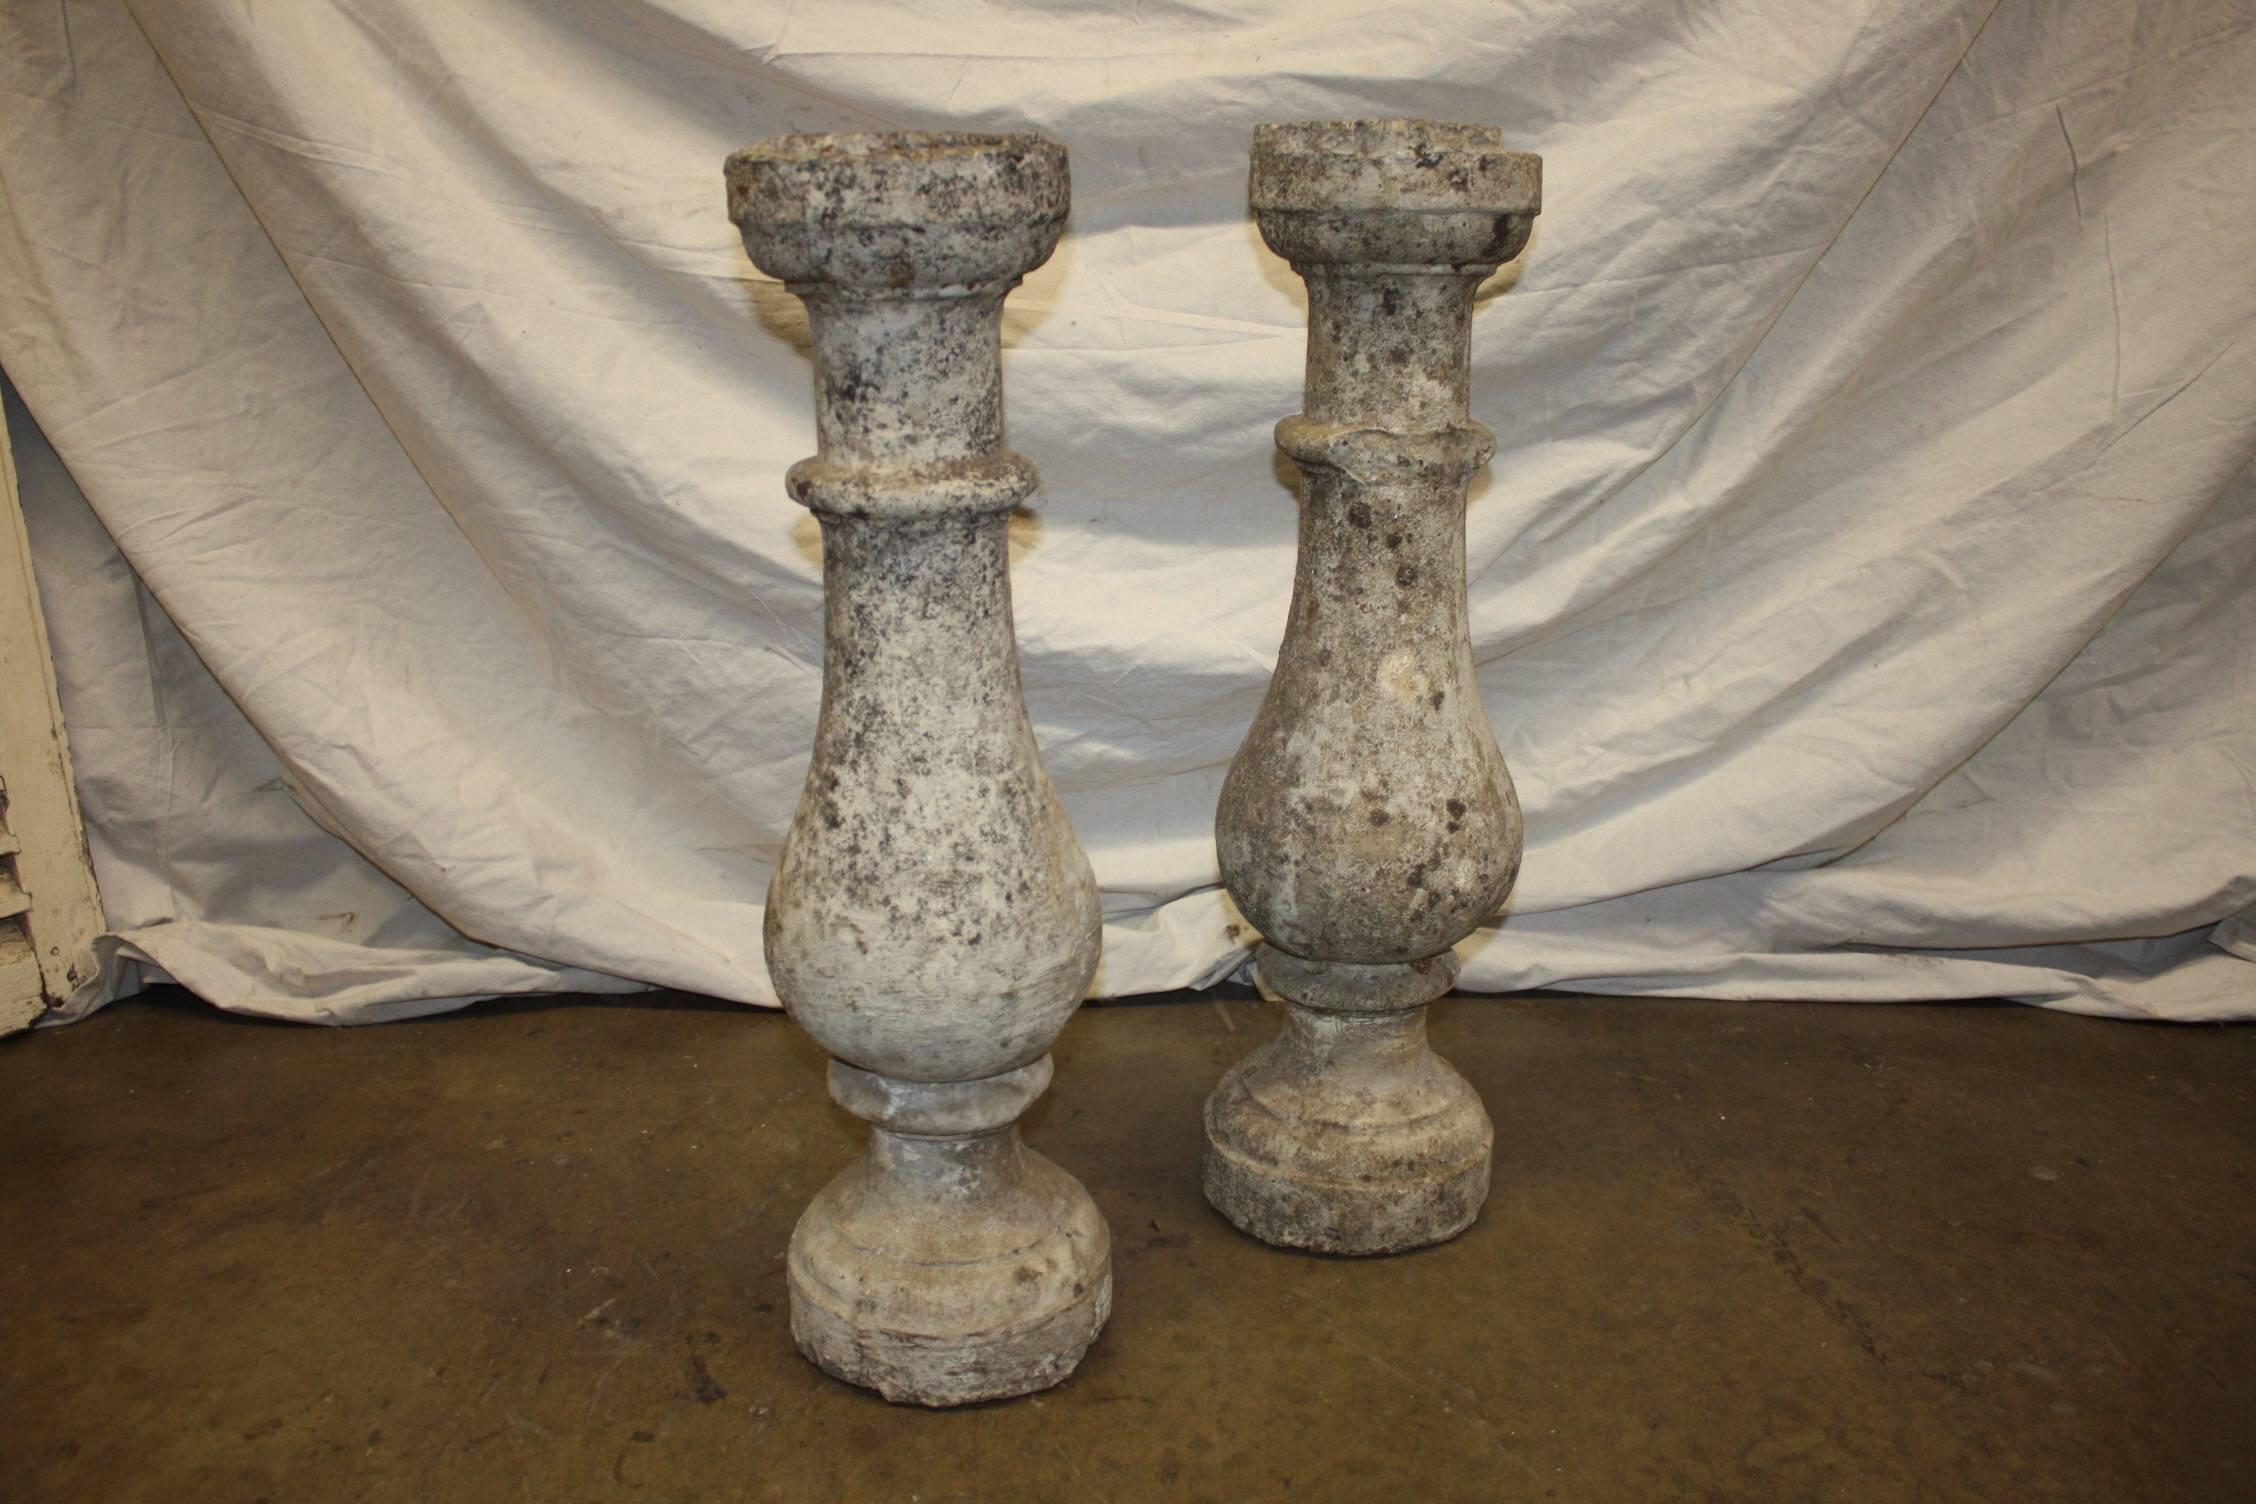 Pair of 19th century French balusters in concrete stone, those are elements from a concrete stone balcony.